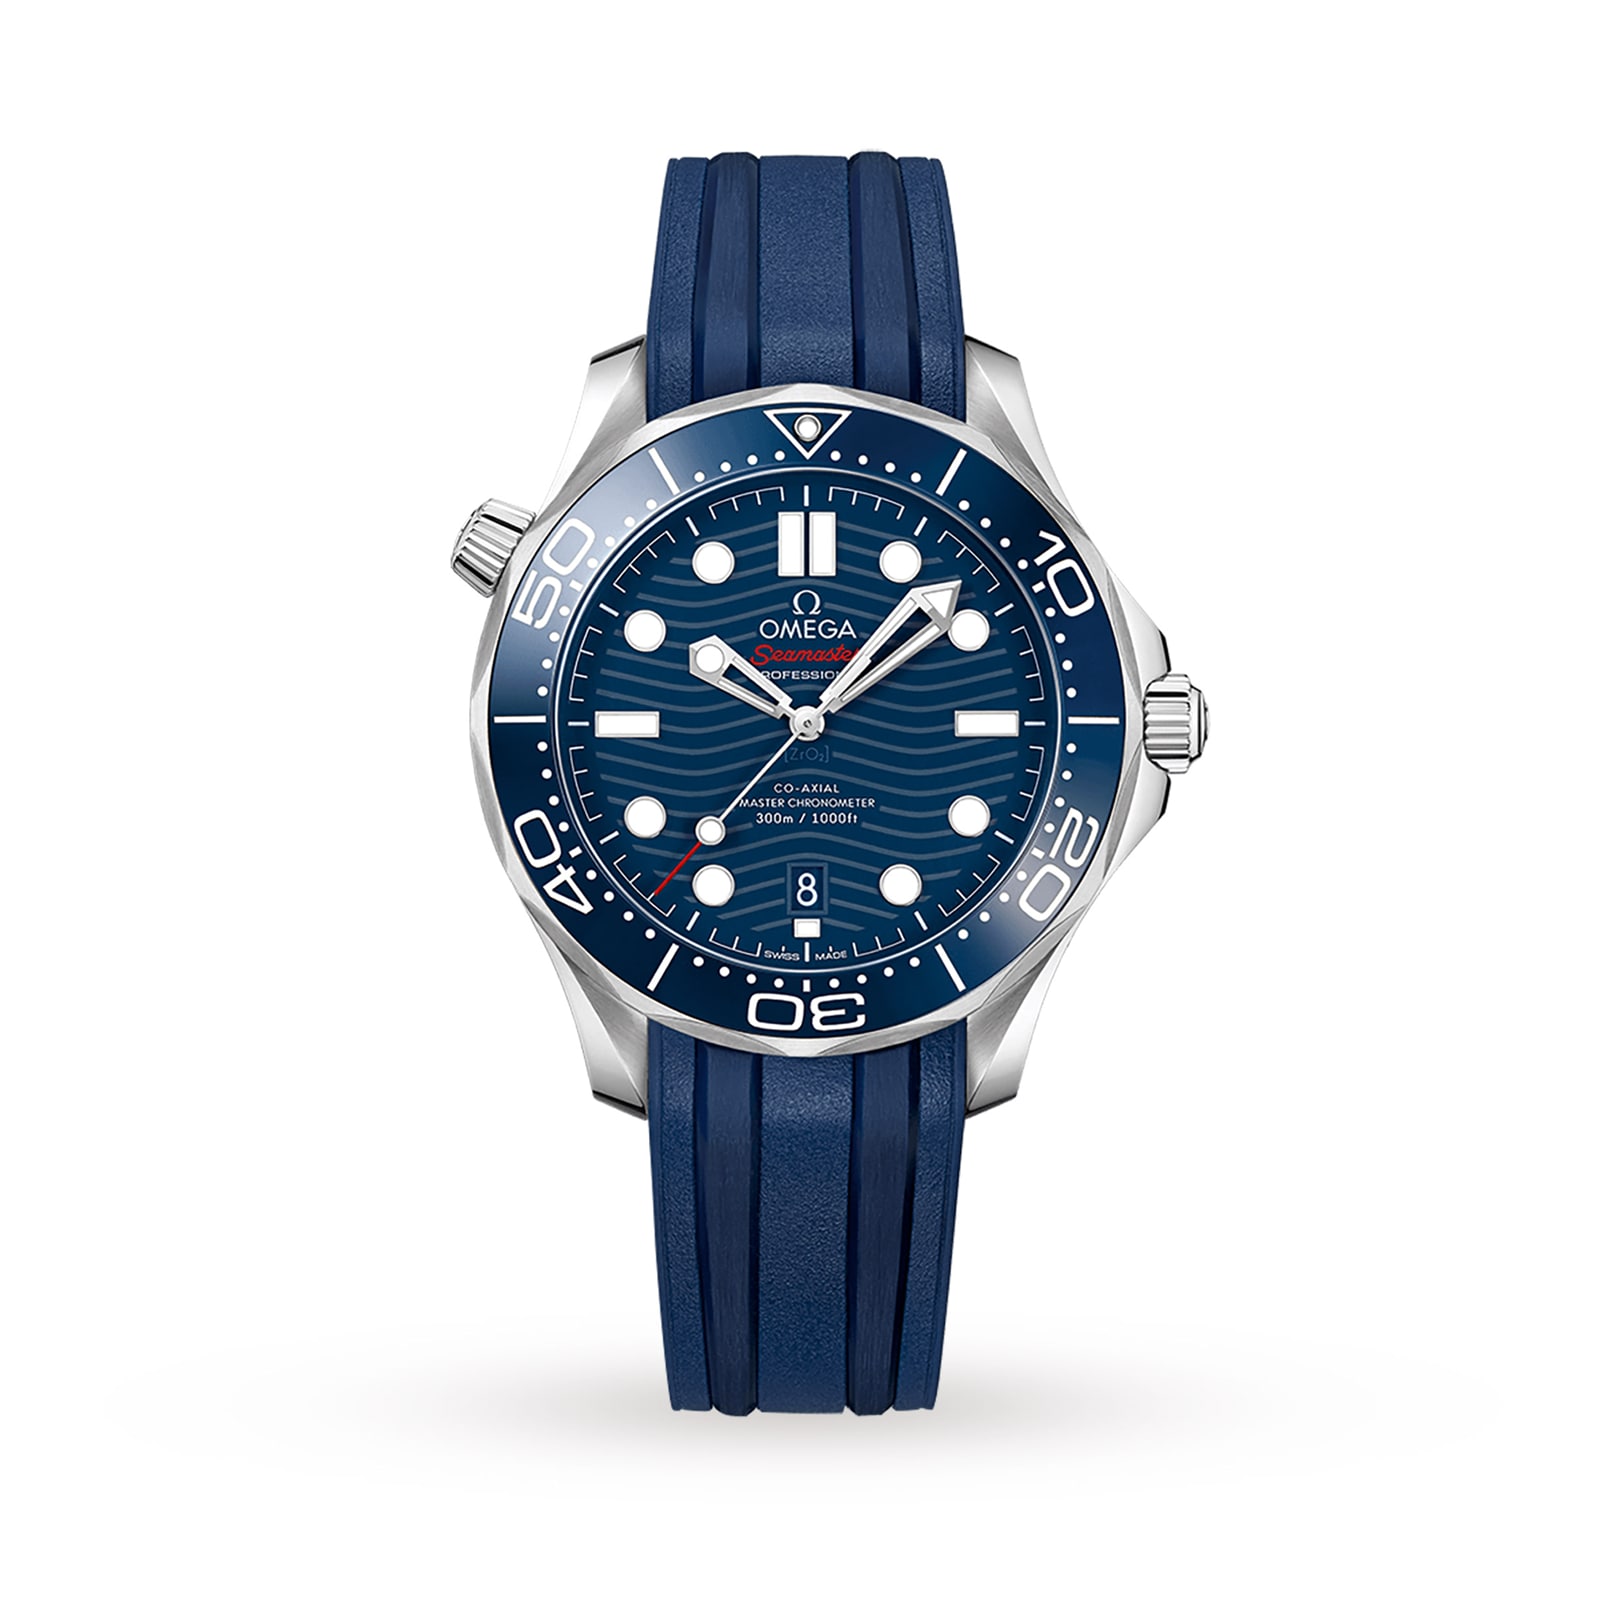 OMEGA Seamaster Diver 300M Blue Dial Mens Watch